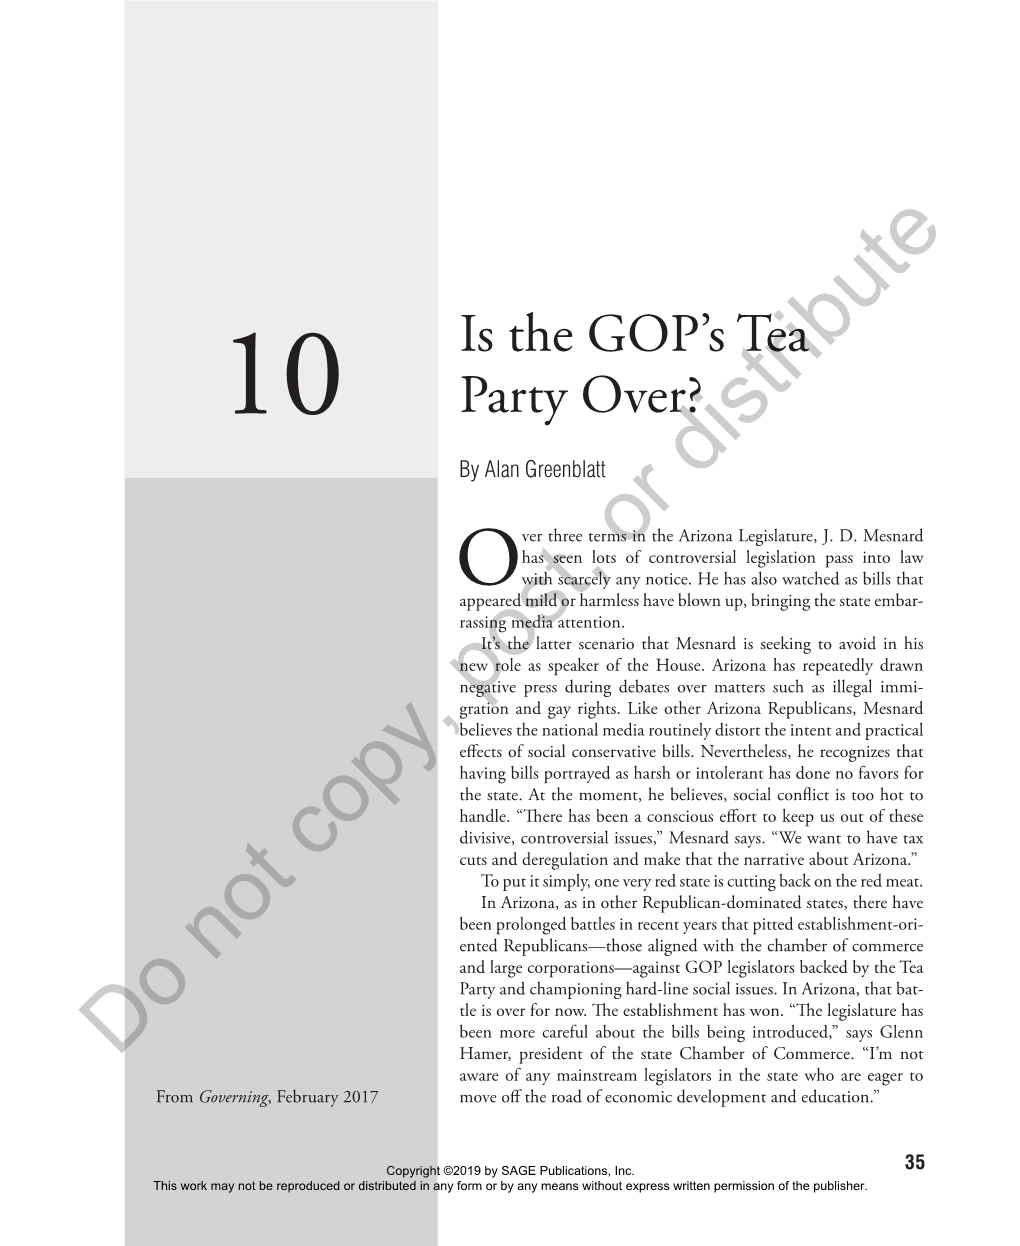 Is the GOP's Tea Party Over?